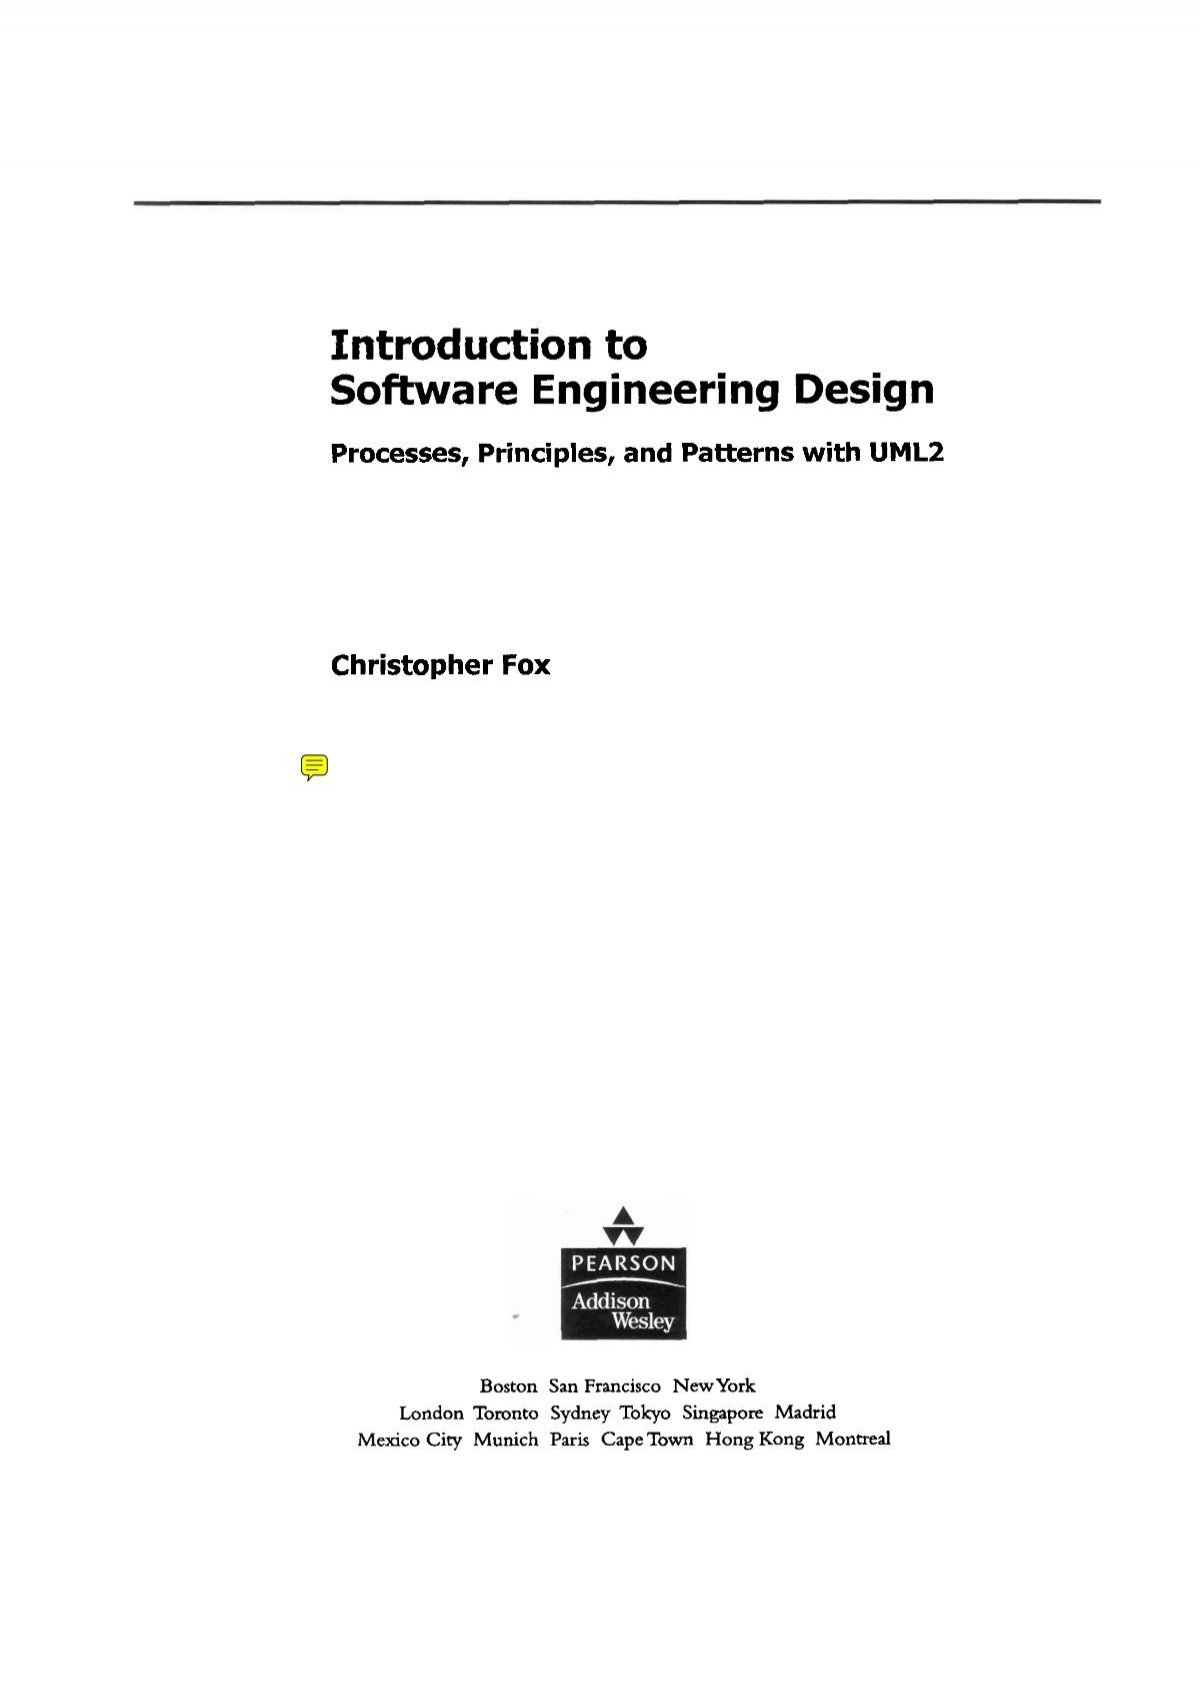 Introduction to Software Engineering Design - Focus Consulting